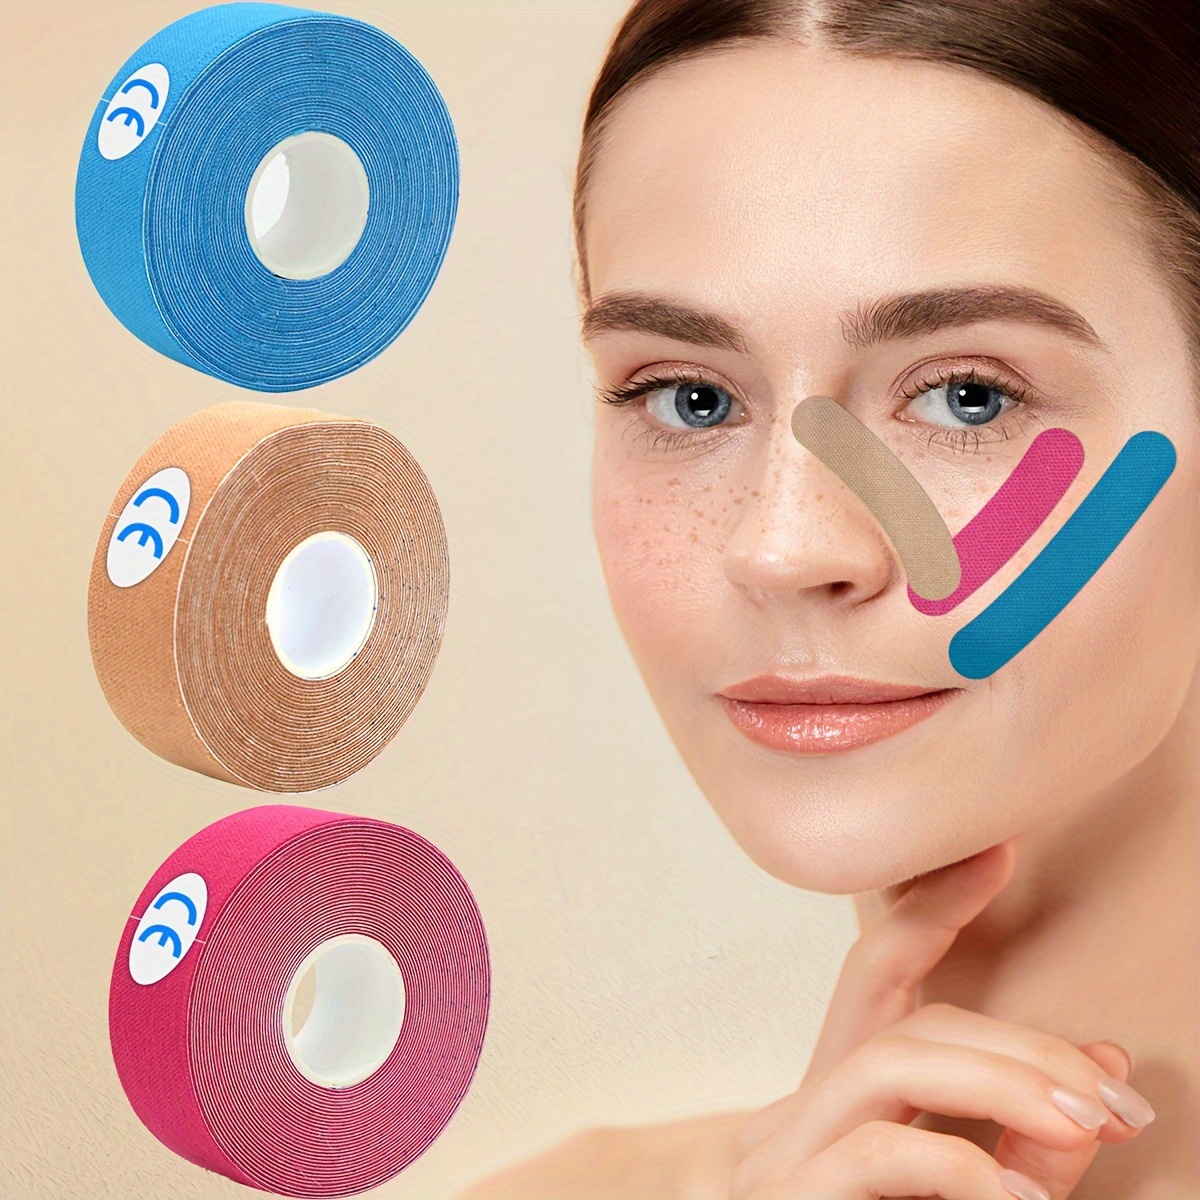 

Skin Myofascial Face Lifting Patches, 1pc 95% Cotton Pure Pink Blue Nude Color Elastic Face Lift Tape For Sagging Jowls Neck Skin Face Double Chin V Jawline